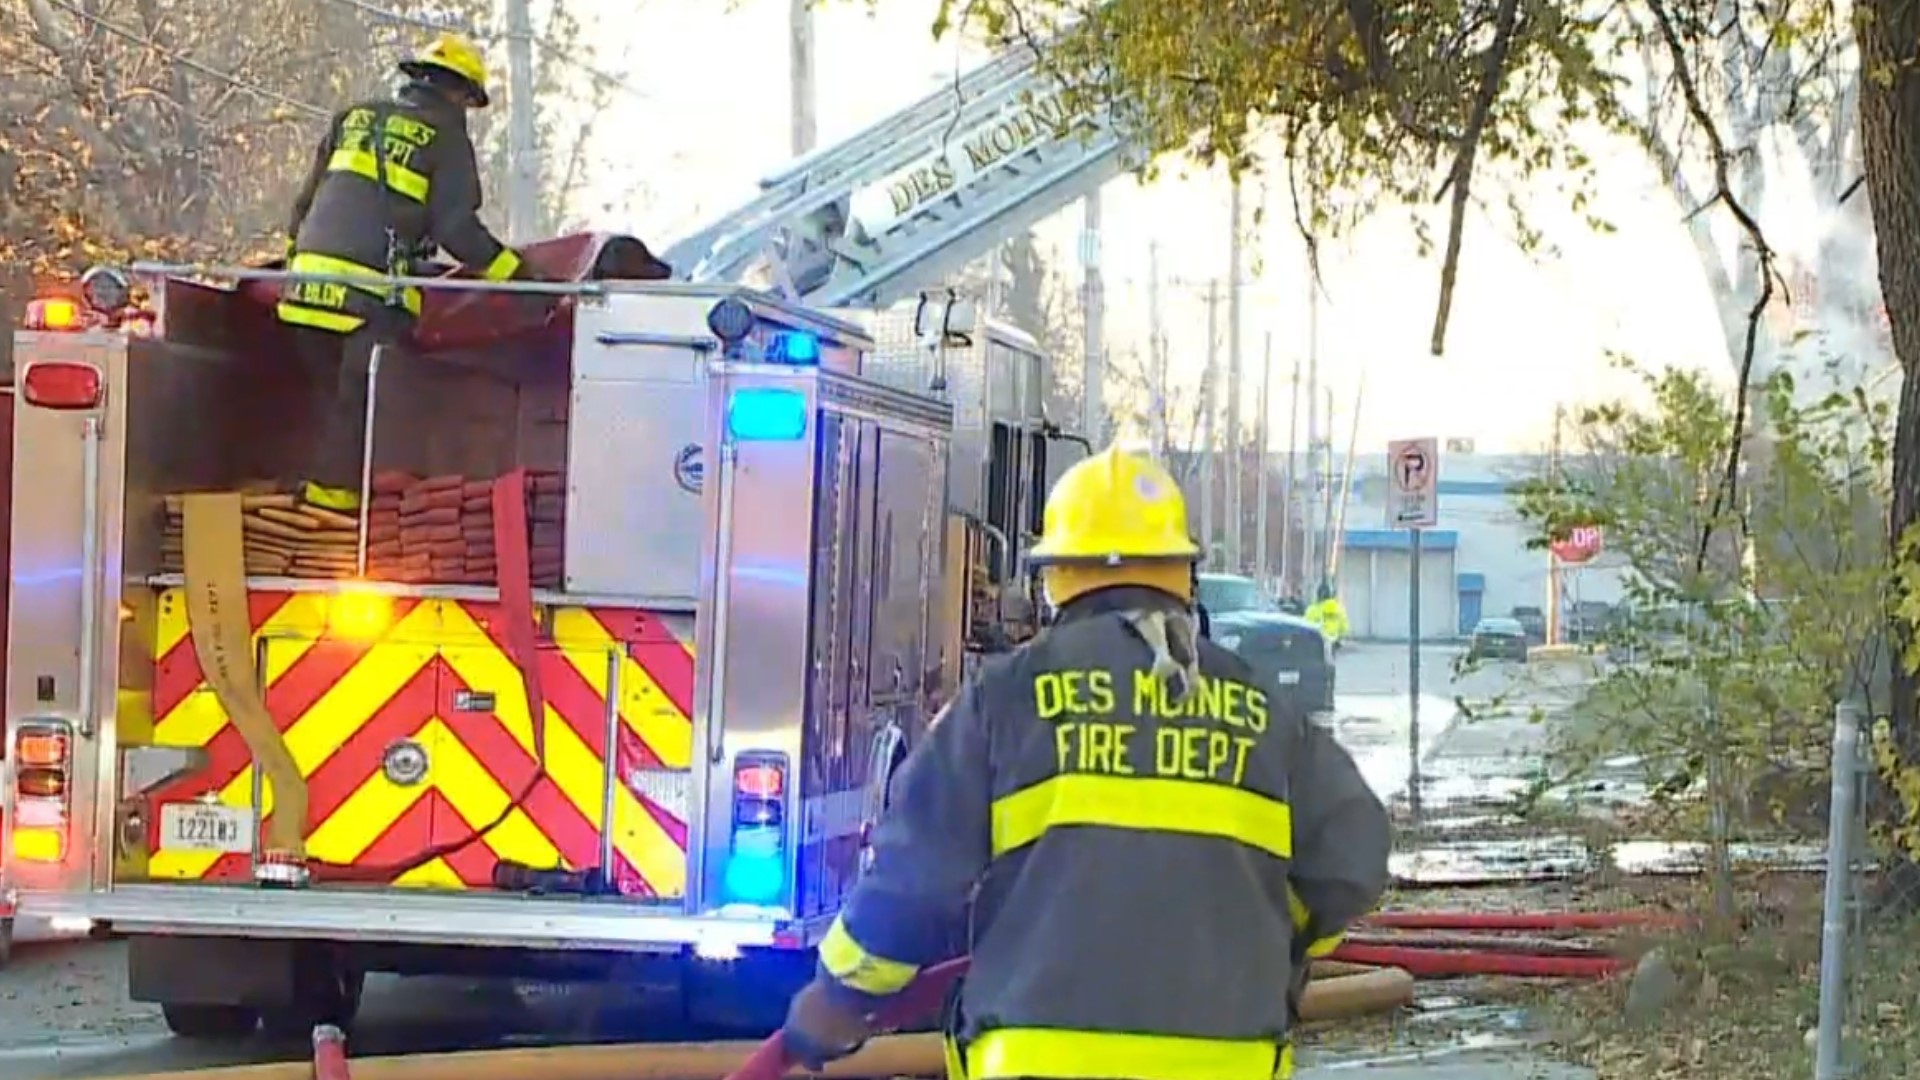 At least 10 Des Moines firefighters have been diagnosed with some form of cancer since 2018, according to the Des Moines Fire Department.